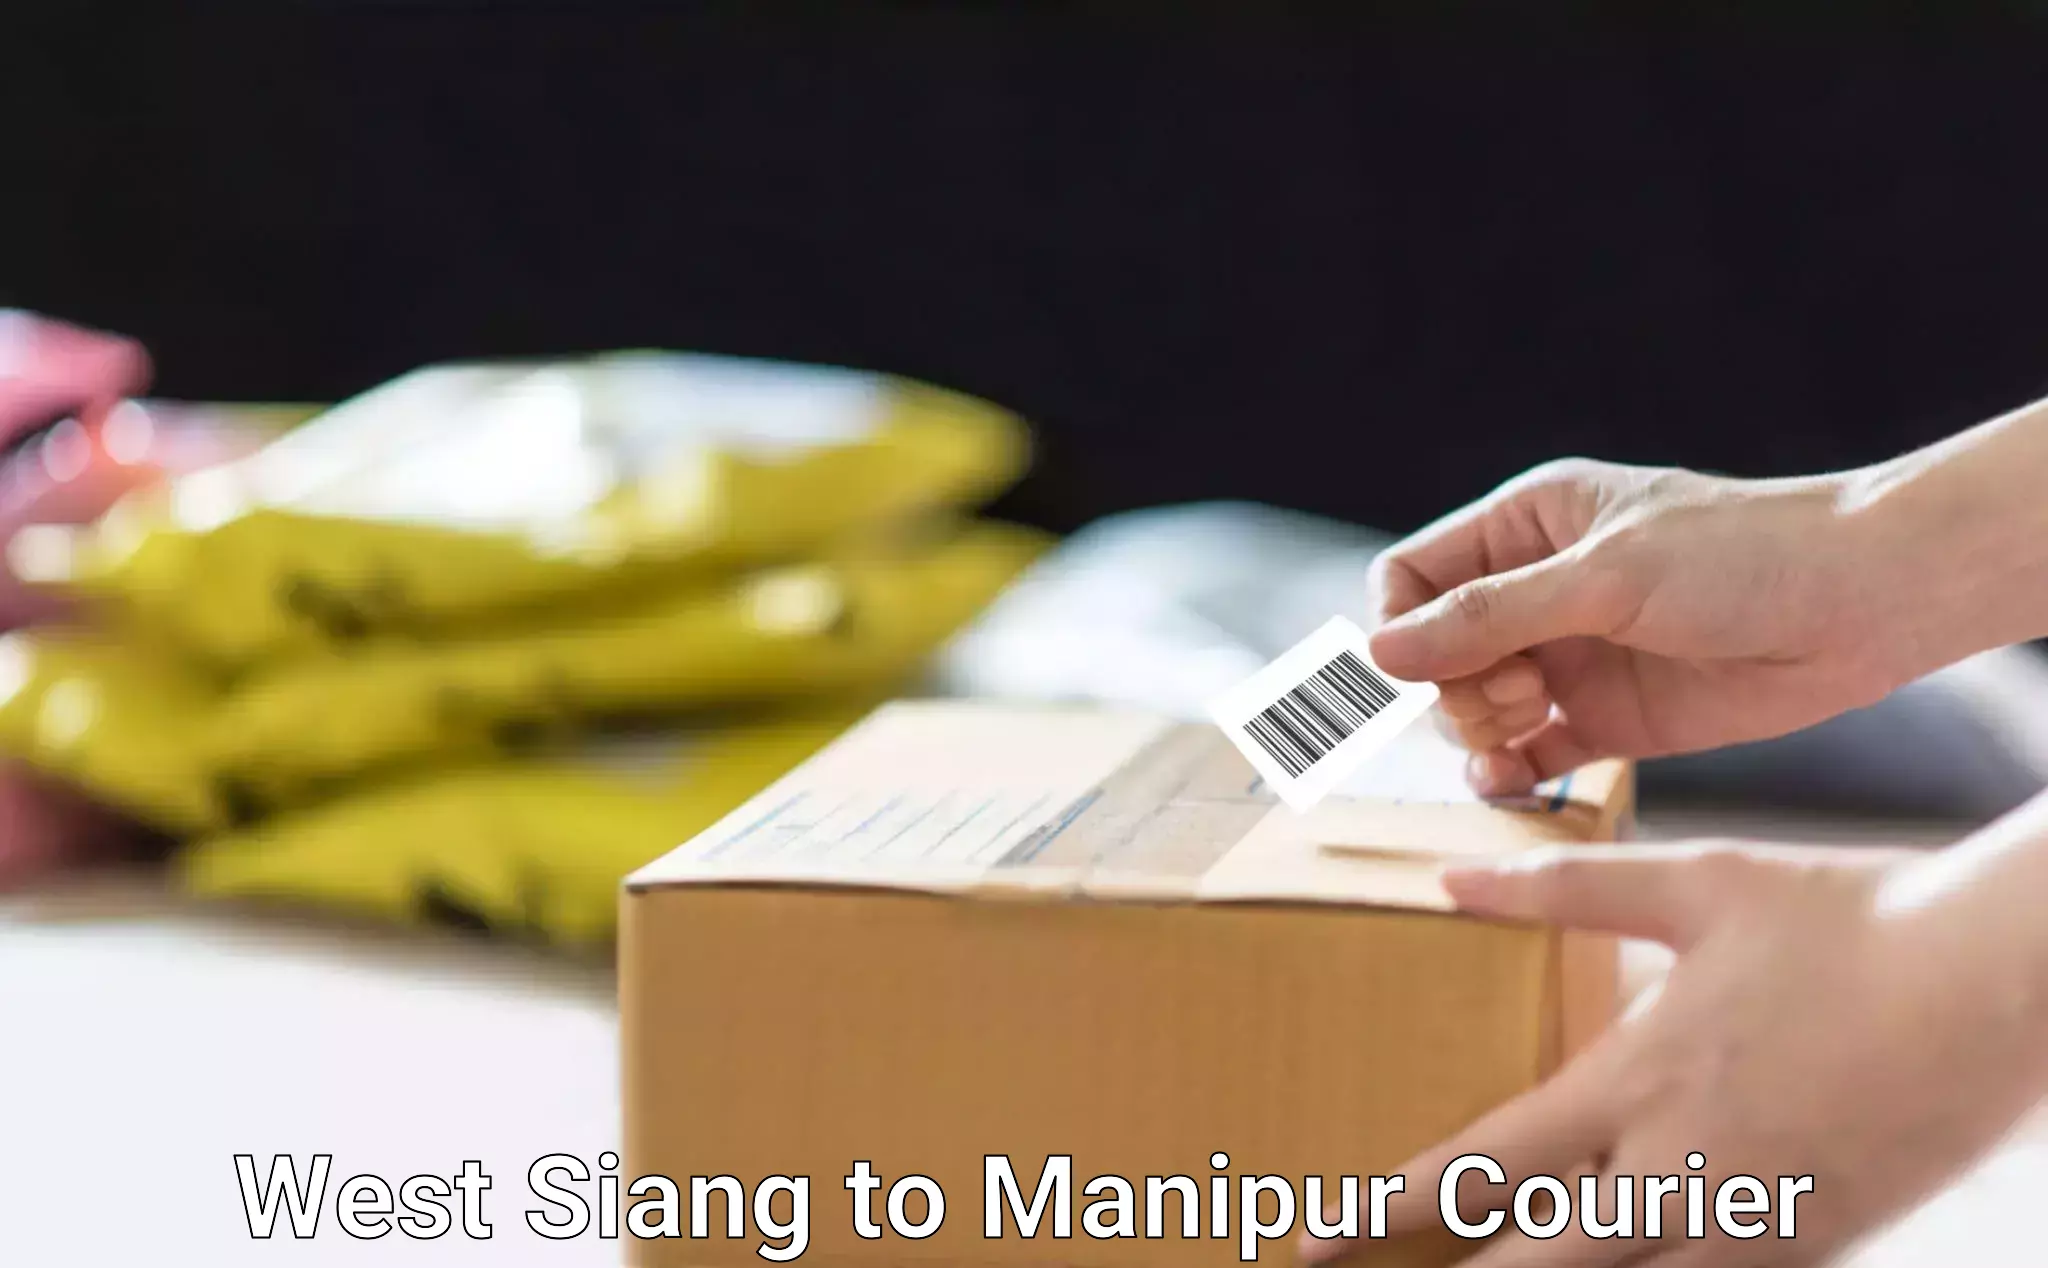 Efficient parcel service West Siang to Manipur